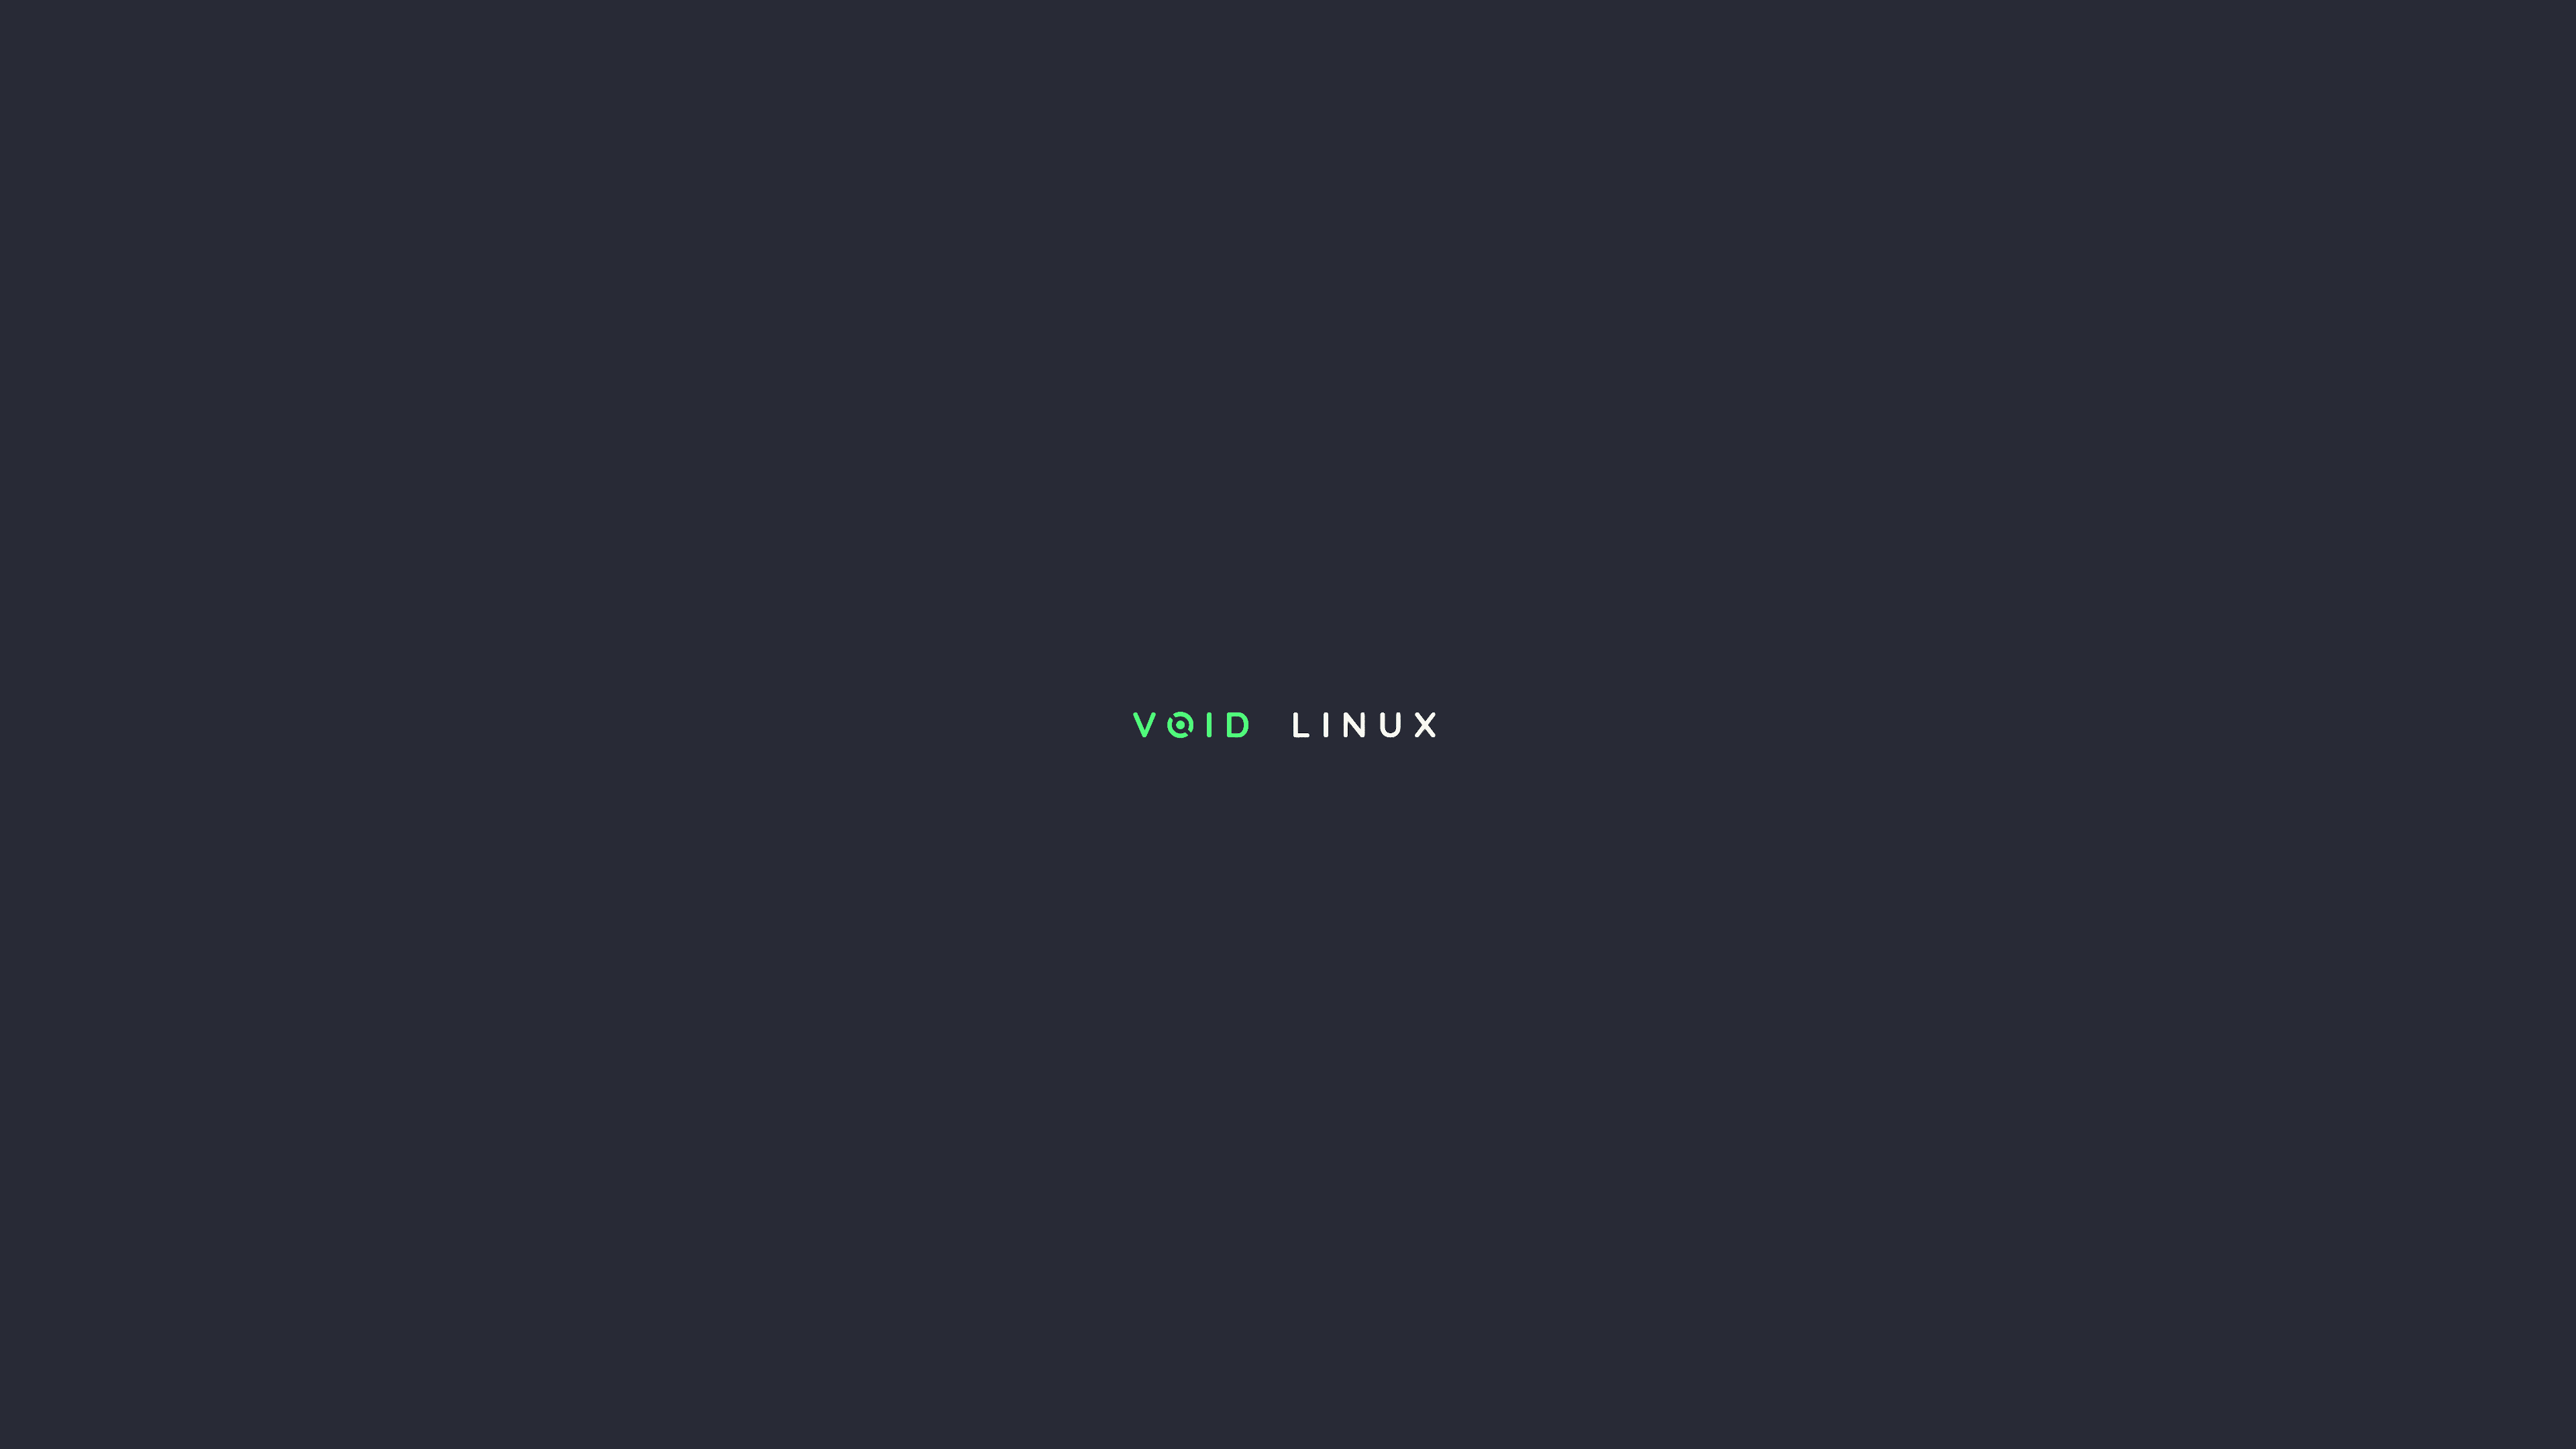 General 3840x2160 void linux Linux operating system minimalism digital art simple background